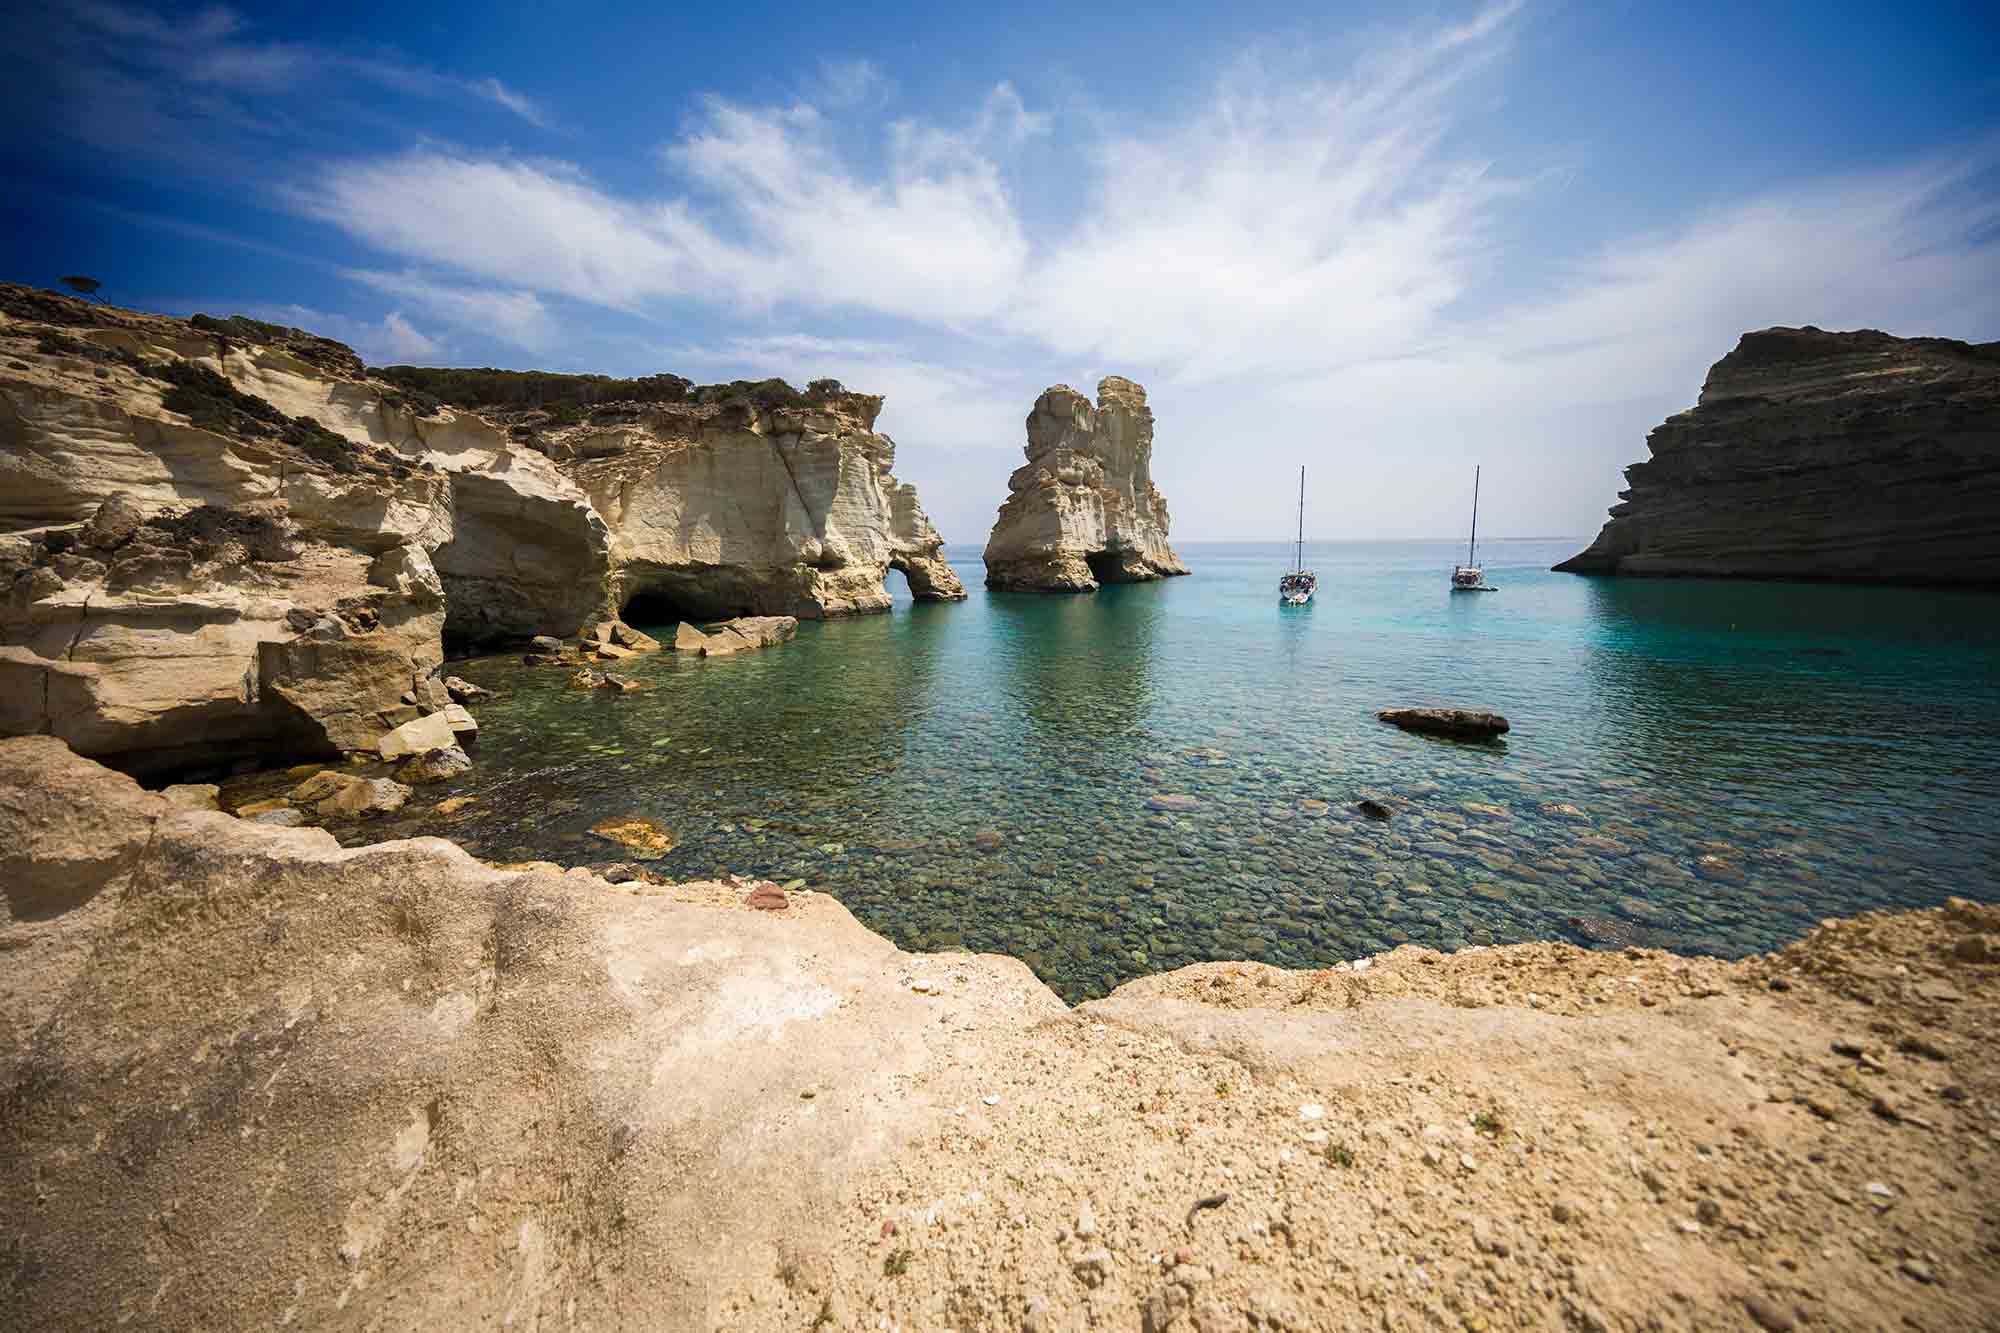 The famous cove of Kleftiko is an old, pirates' hideout on the southwest tip of Milos island. It can be reached by boat, or if your an athletic hiker and as adventurous as us, by foot. © ULLI MAIER & NISA MAIER